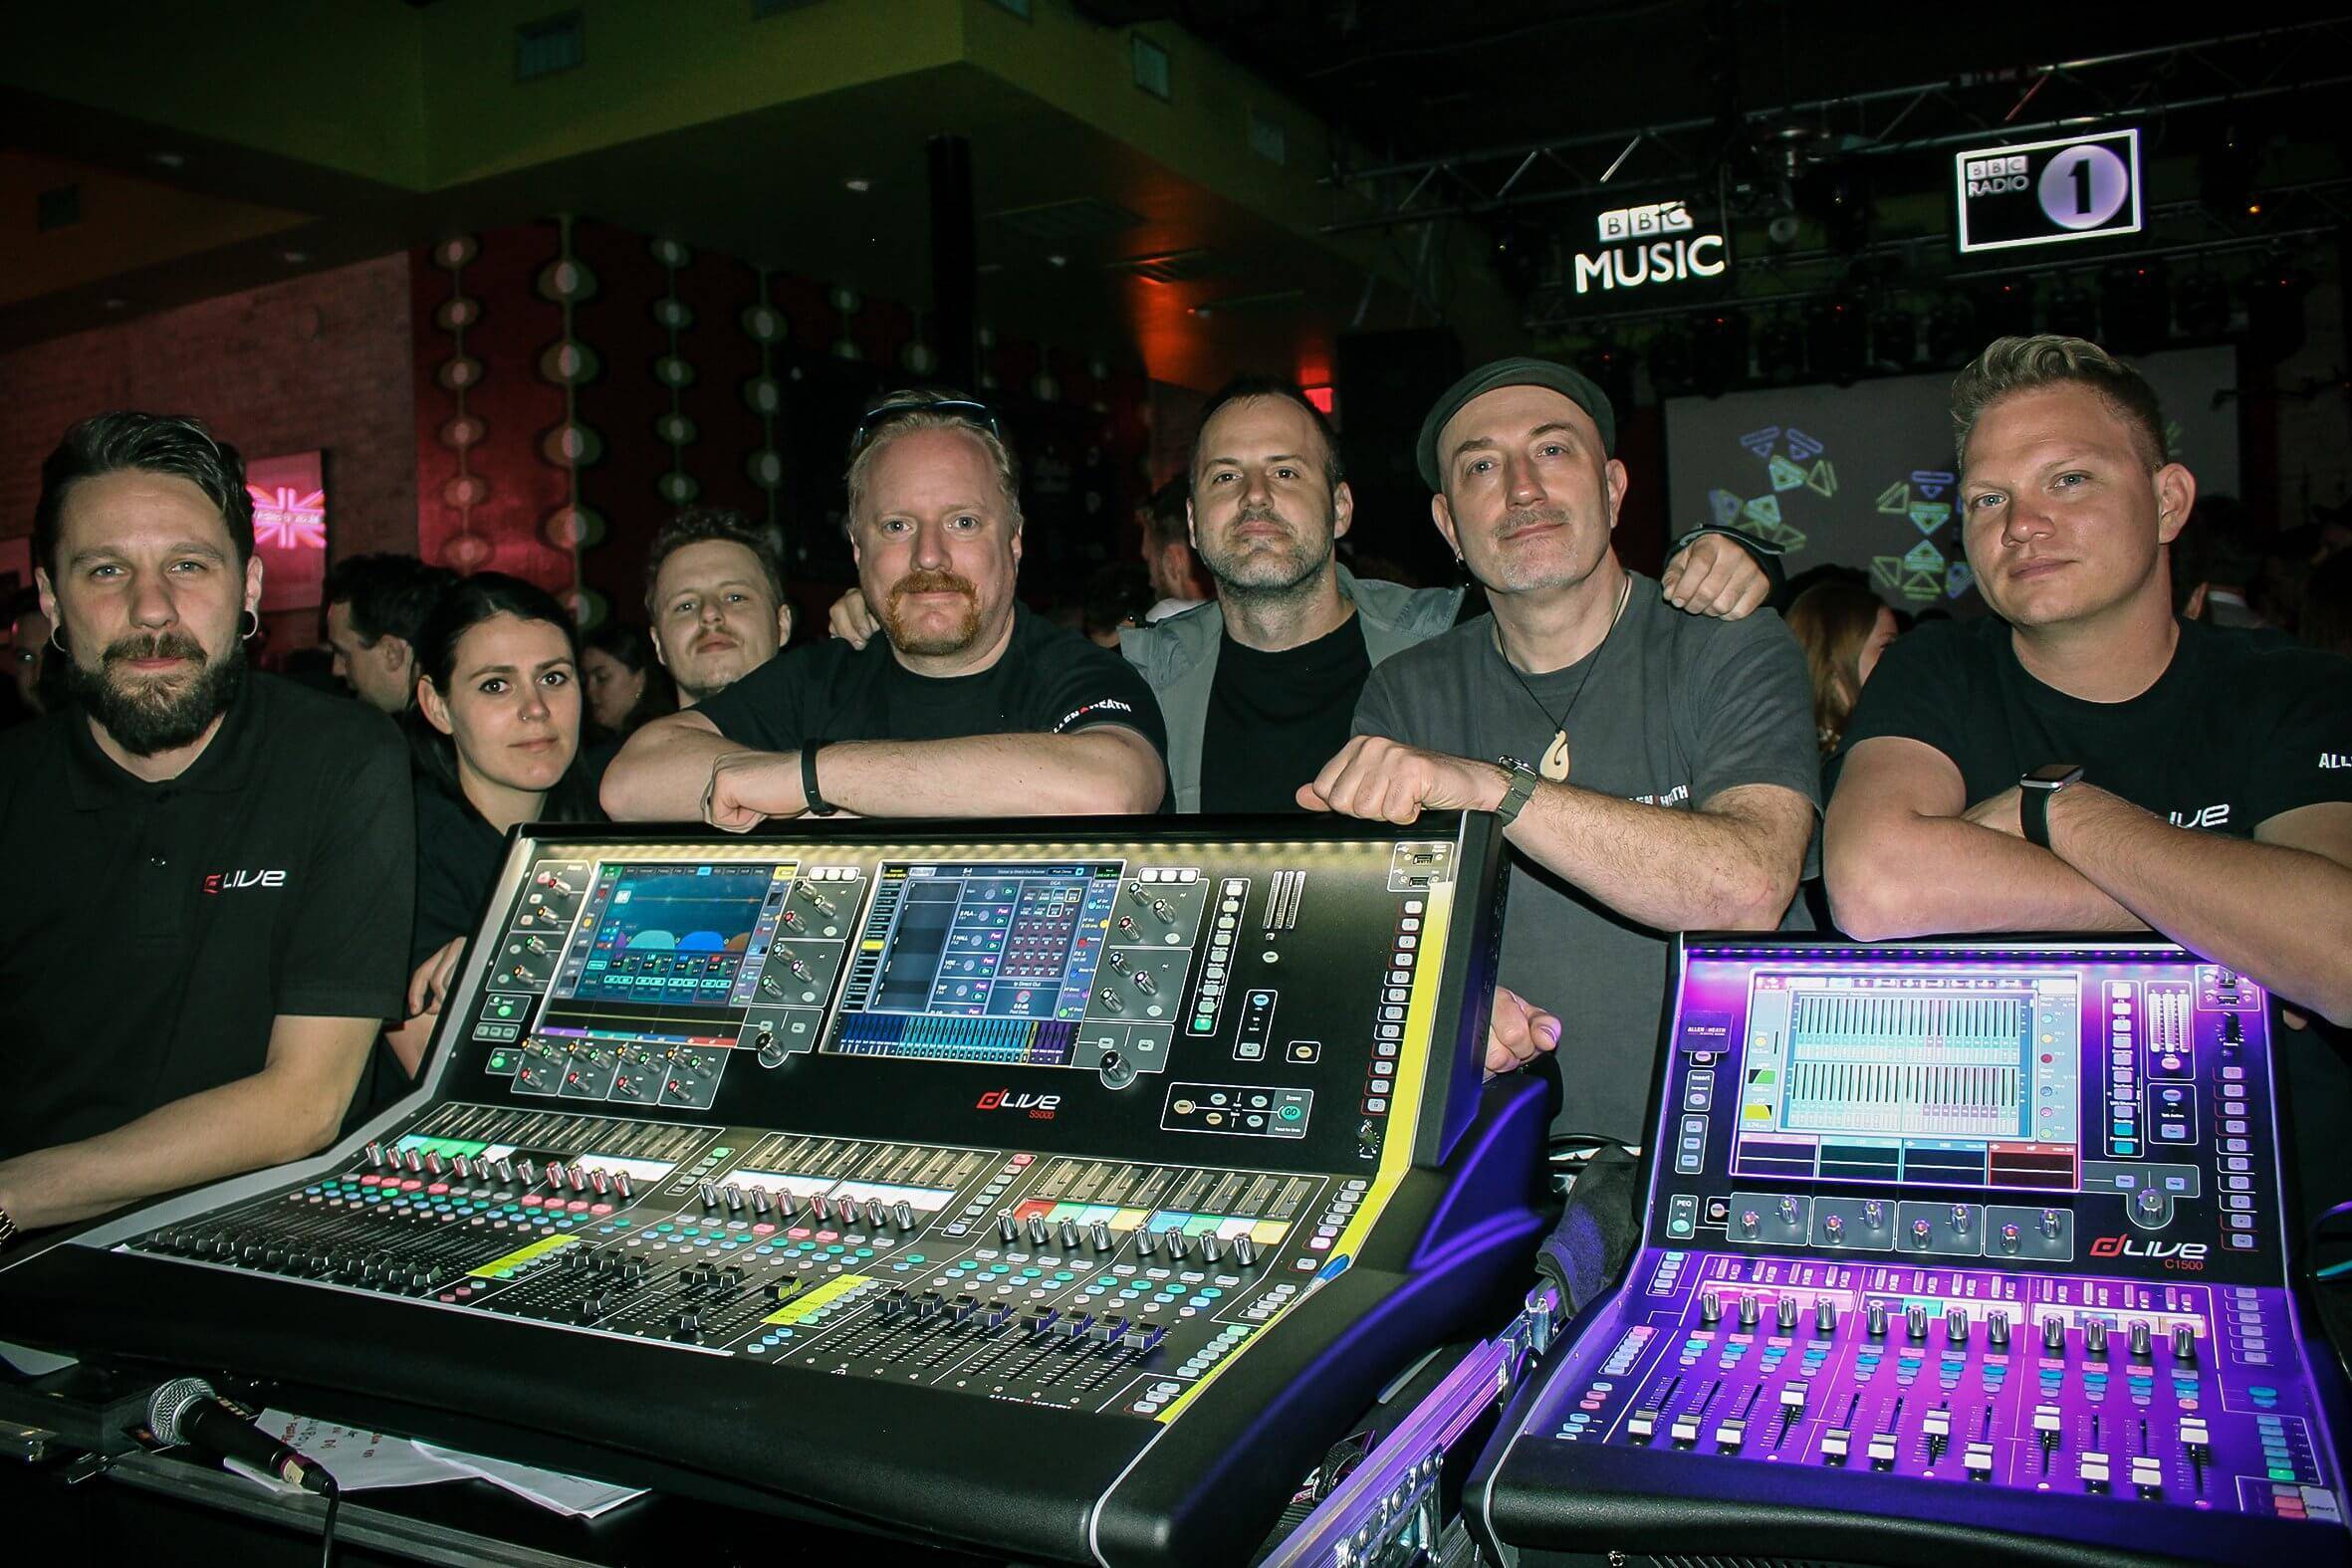 Allen & Heath digital mixers were once again at the forefront of this year’s South by Southwest Music and Media Conference (SXSW) in Austin, Texas, USA.